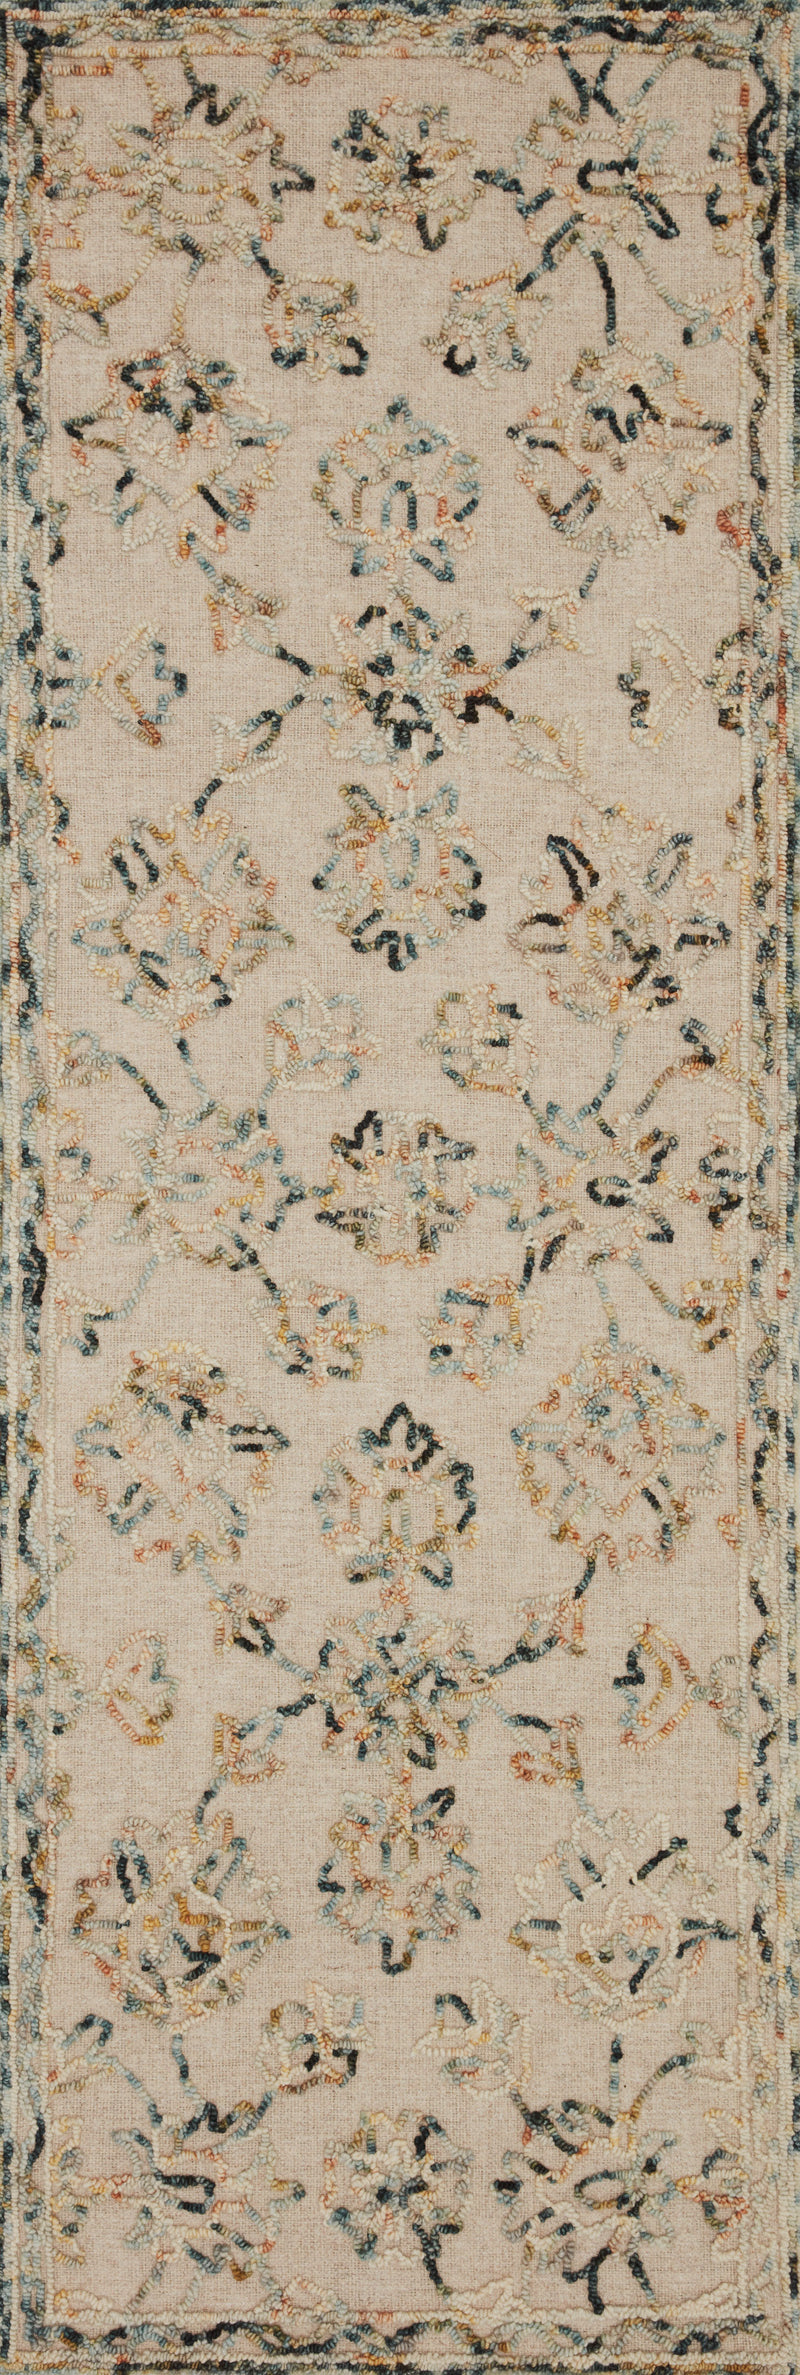 Halle Collection Wool Rug  in  Lagoon / Multi Blue Accent Hand-Hooked Wool